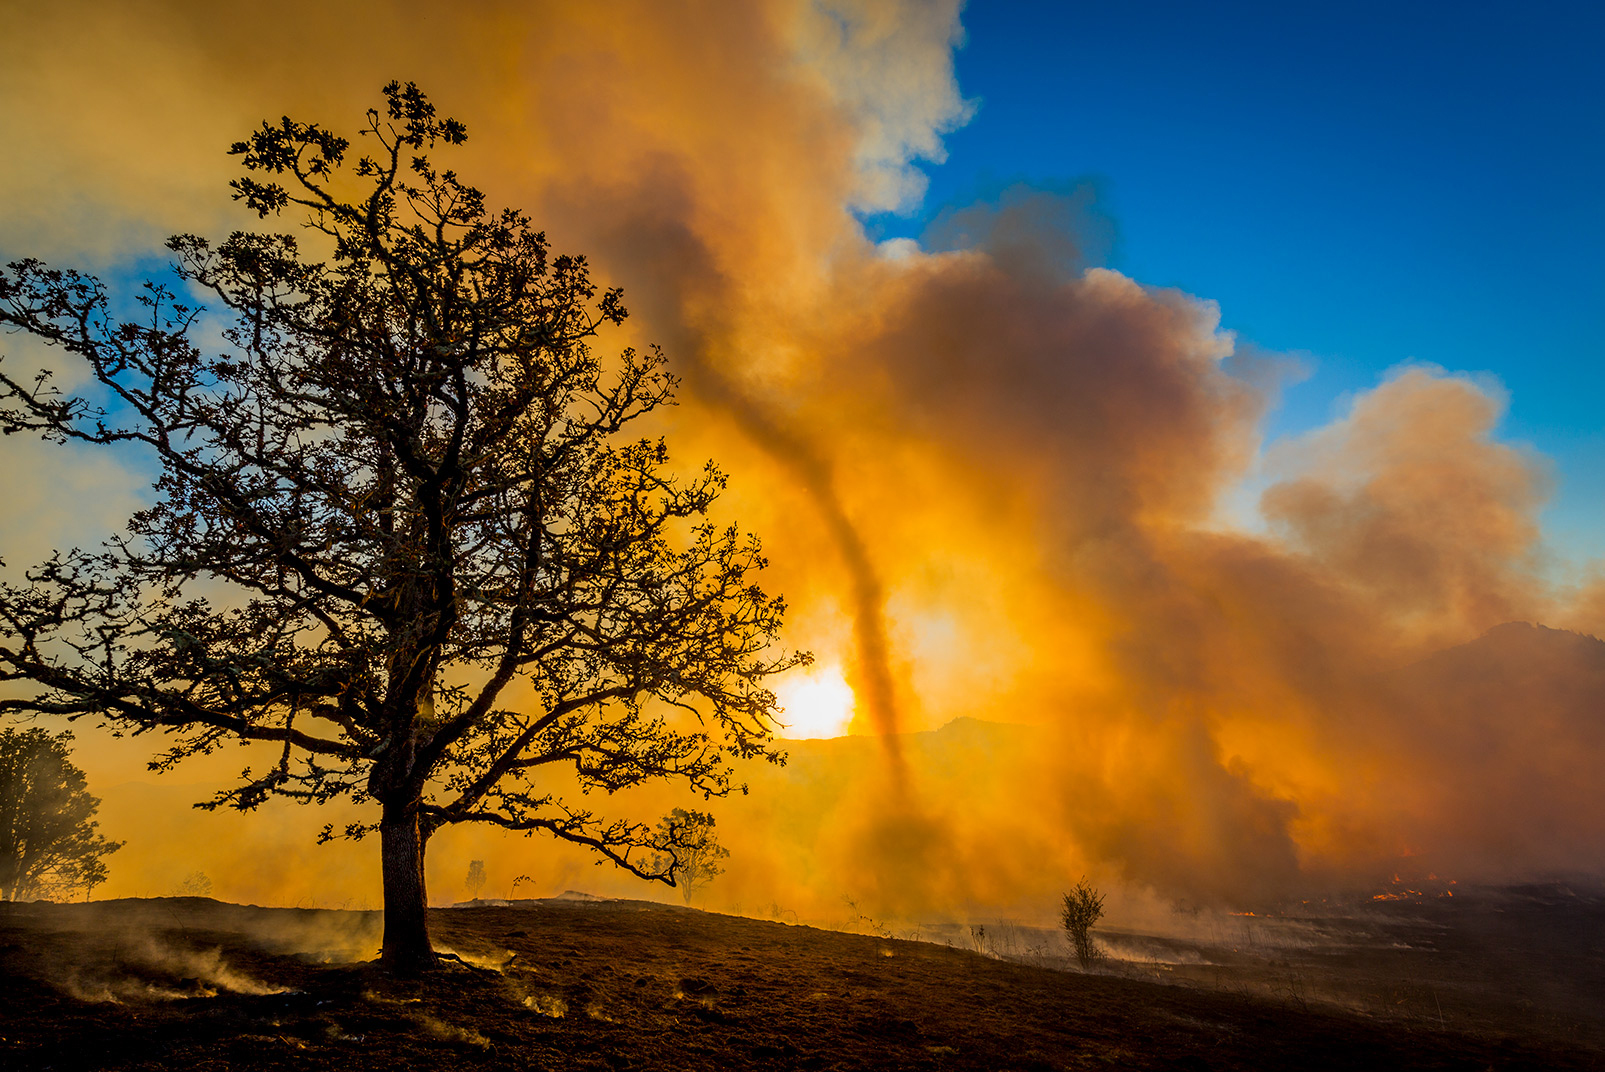 Ever “The Artist,” Houston was amazed by how fire affected images: The intense heat distorted focus and smoke softened sunlight. Houston experimented artistically with those natural effects, here in the Willamette Confluence Preserve. Photo © Jason Houston